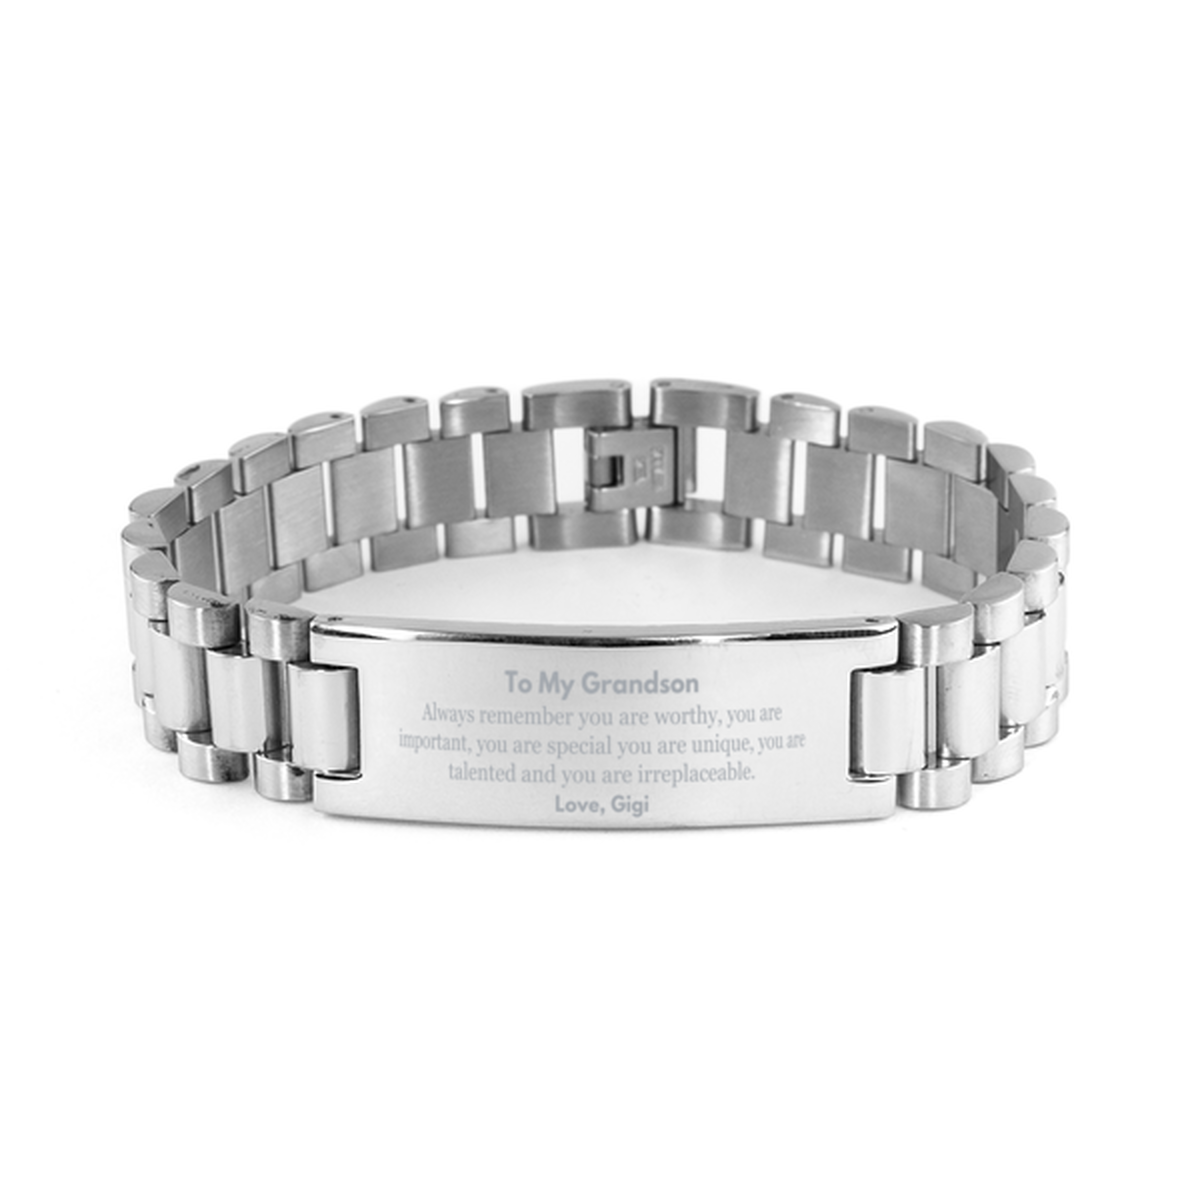 Grandson Birthday Gifts from Gigi, Inspirational Ladder Stainless Steel Bracelet for Grandson Christmas Graduation Gifts for Grandson Always remember you are worthy, you are important. Love, Gigi